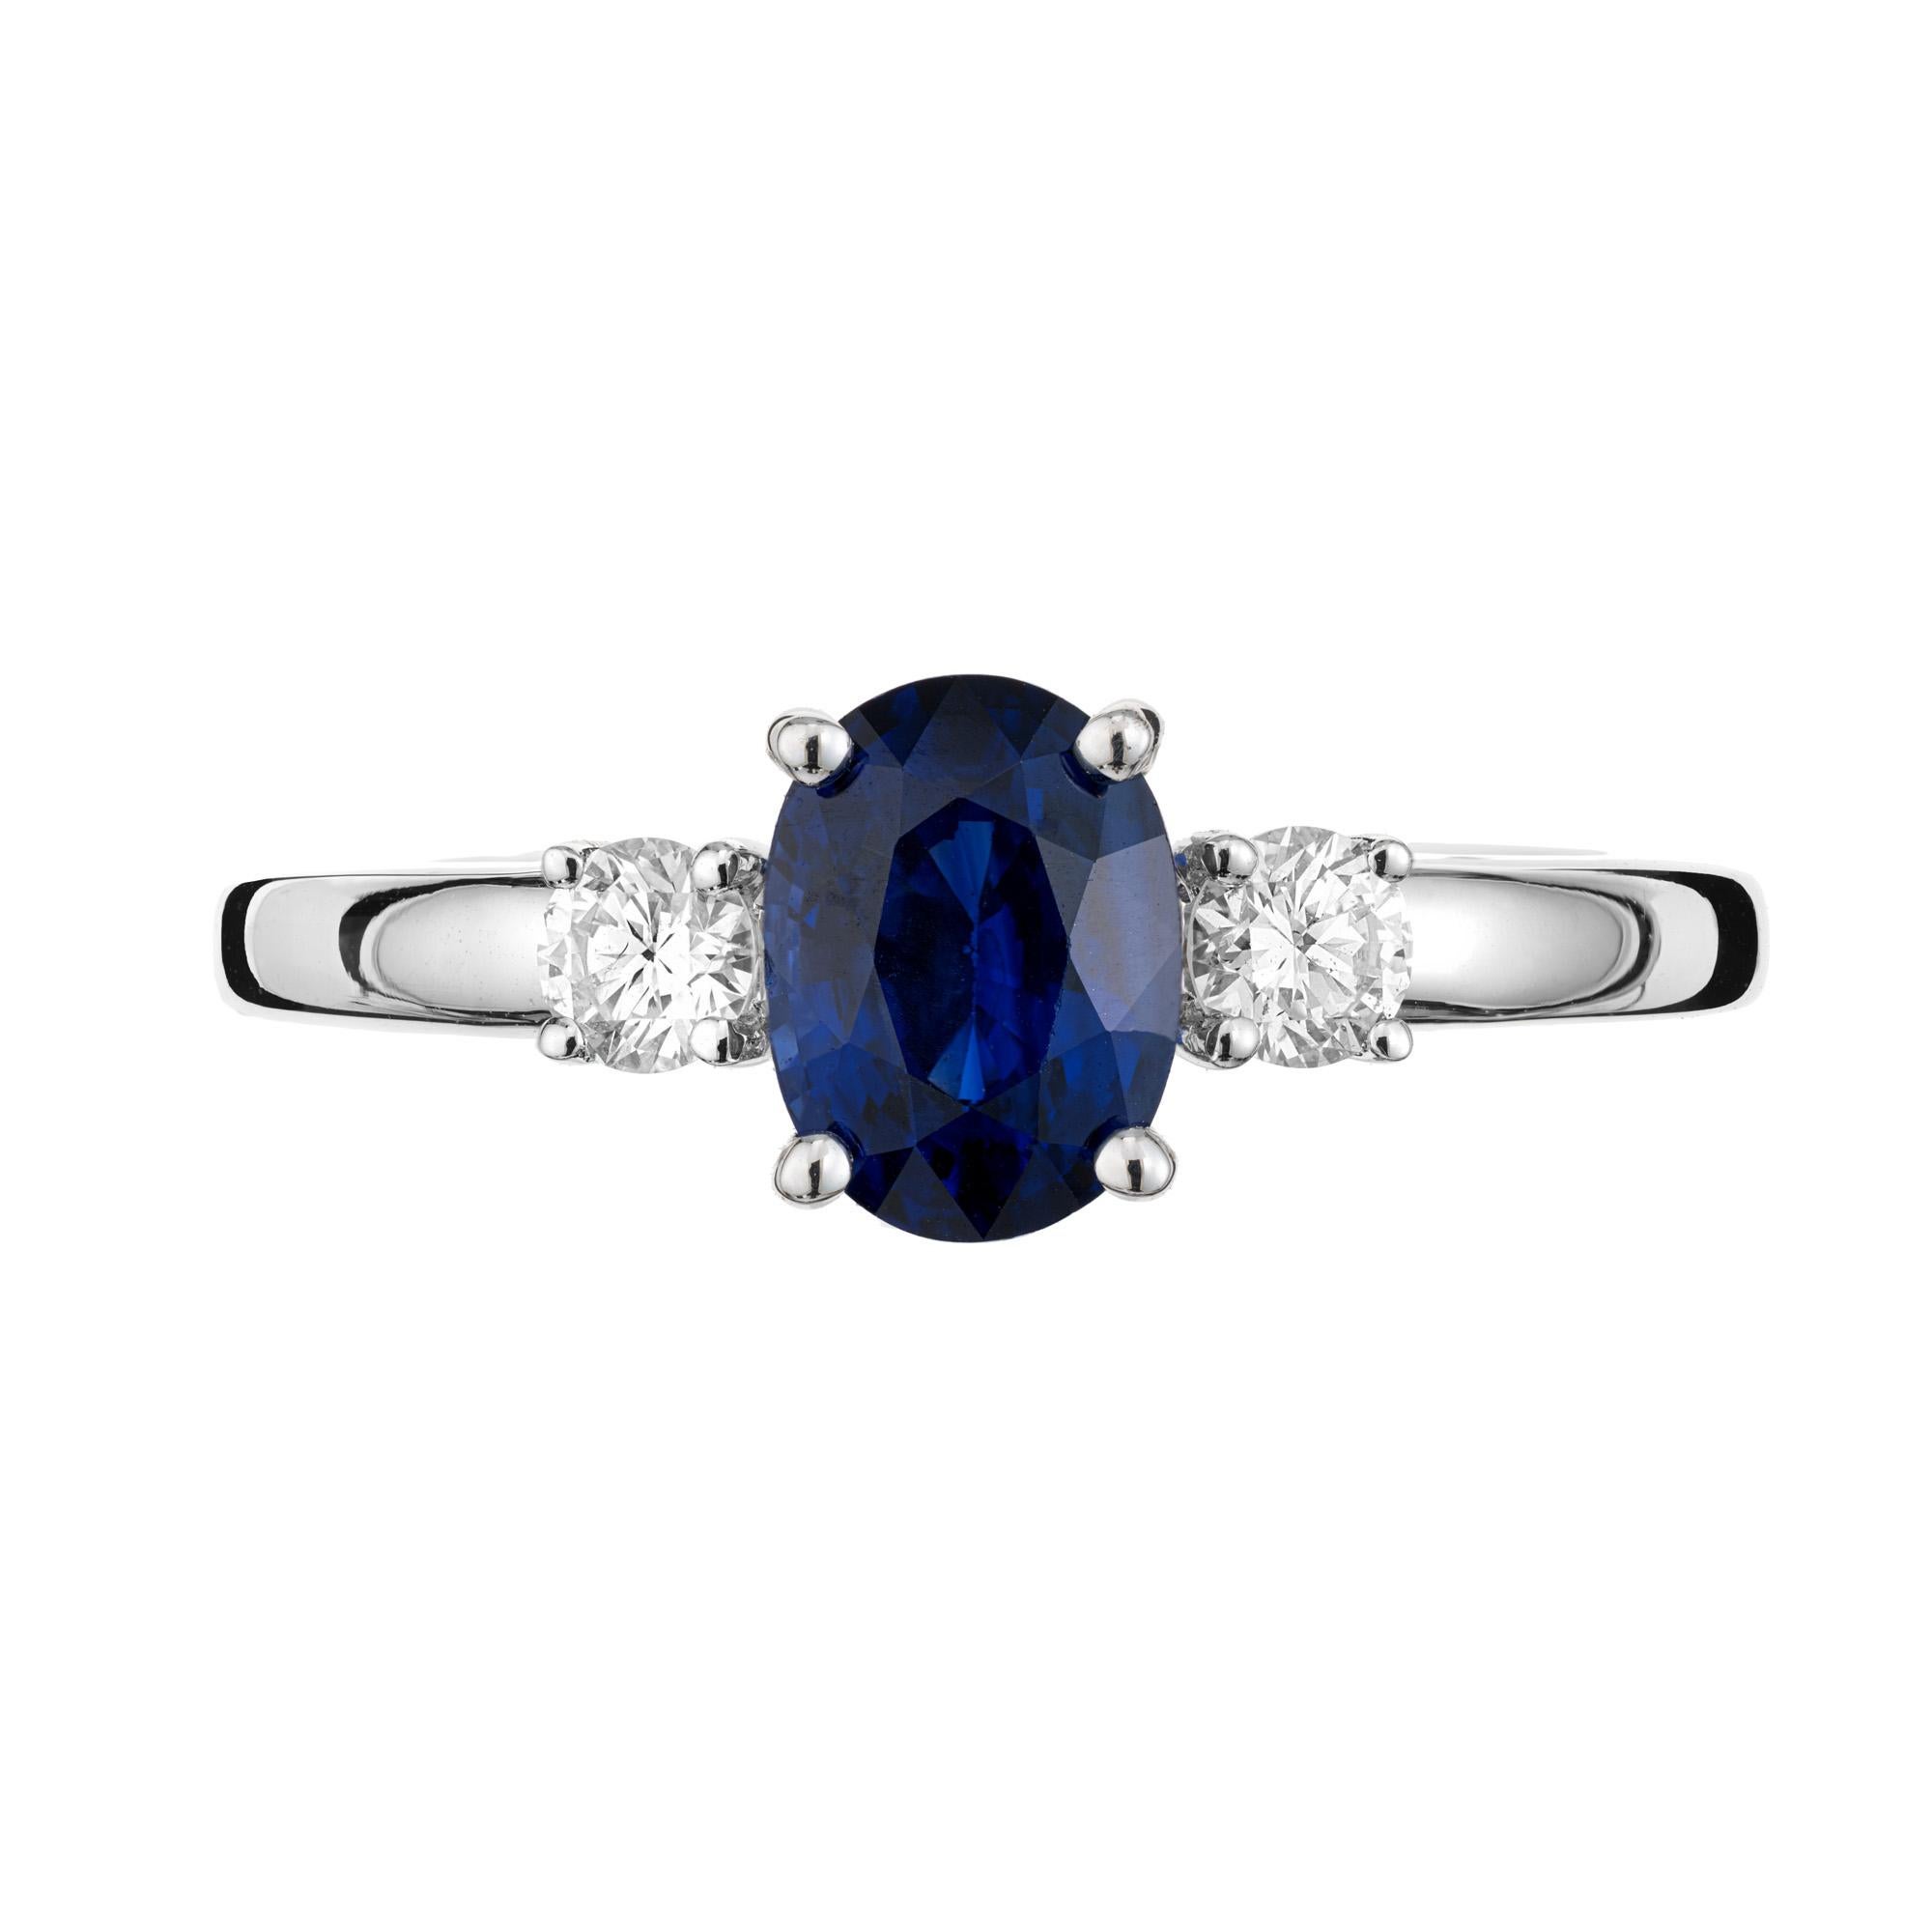 This Peter Suchy original GIA certified 1.00ct sapphire diamond three stone engagement ring is both classic and timeless. It features a beautiful oval-cut sapphire center stone. The sapphire has a deep rich blue hue. Certified by the GIA as simple